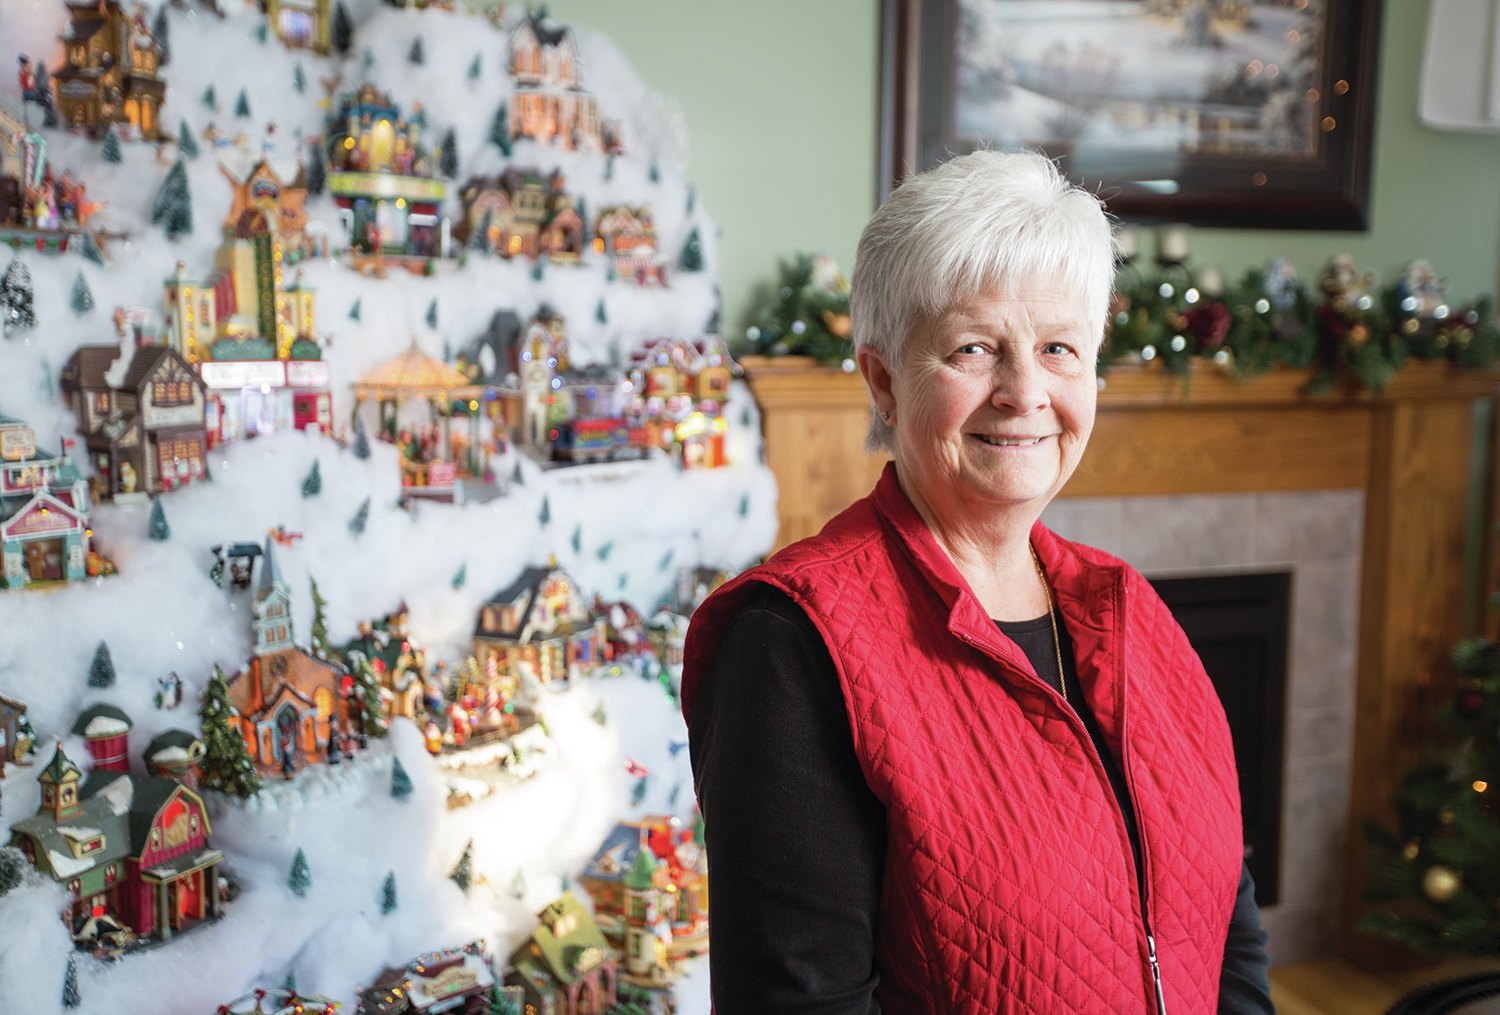 CHRISTMAS TRADITION - Linda Saretzky spent some time looking at her huge Christmas village display in her home in Red Deer. Saretzky and her husband have always been huge lovers of Christmas. See our slideshow at www.reddeerexpress.com.